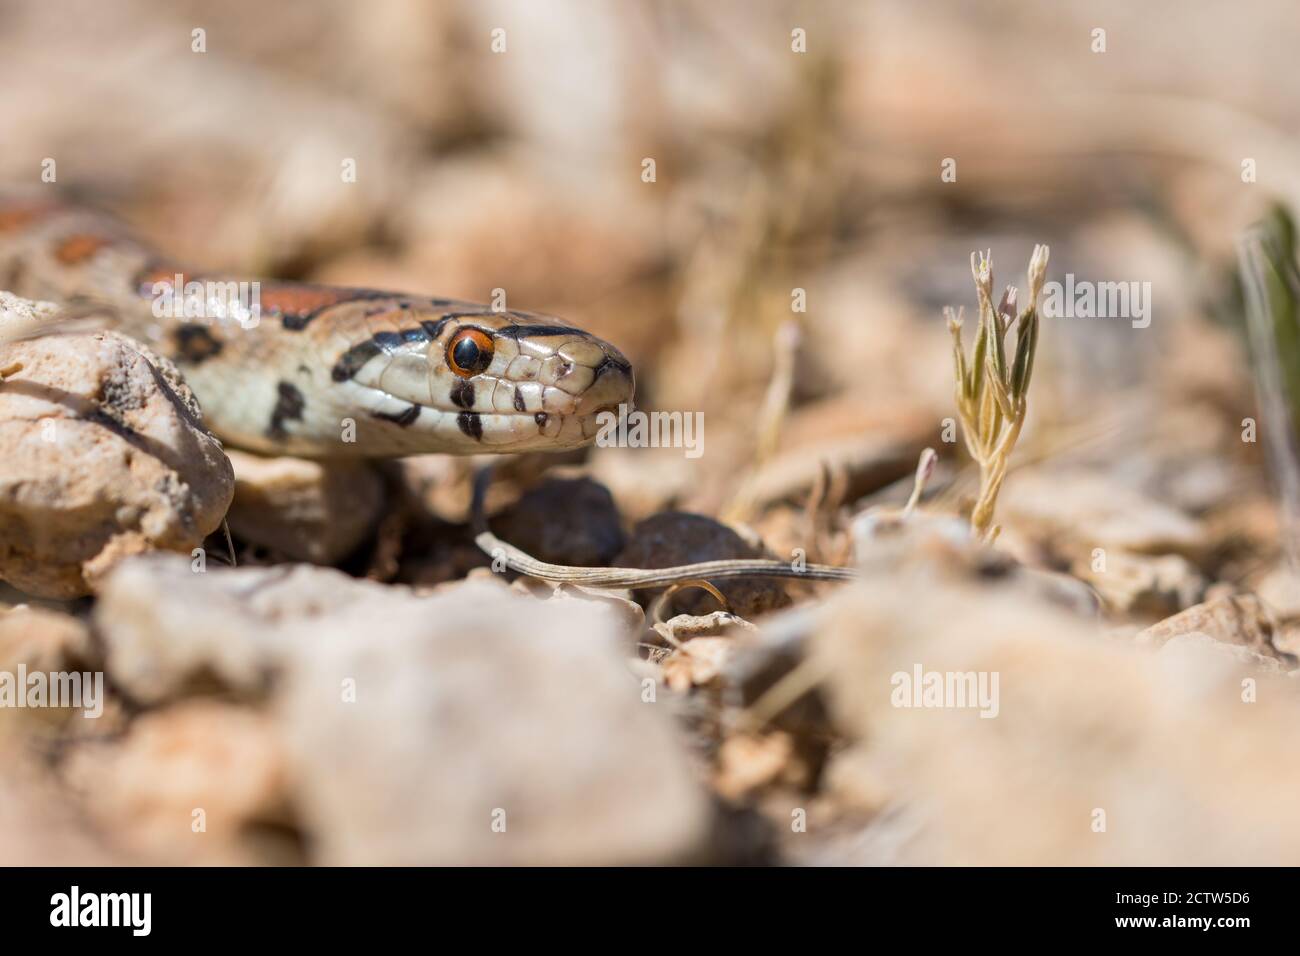 Close up shot of the head of an adult Leopard Snake or European Ratsnake, Zamenis situla, in Malta Stock Photo